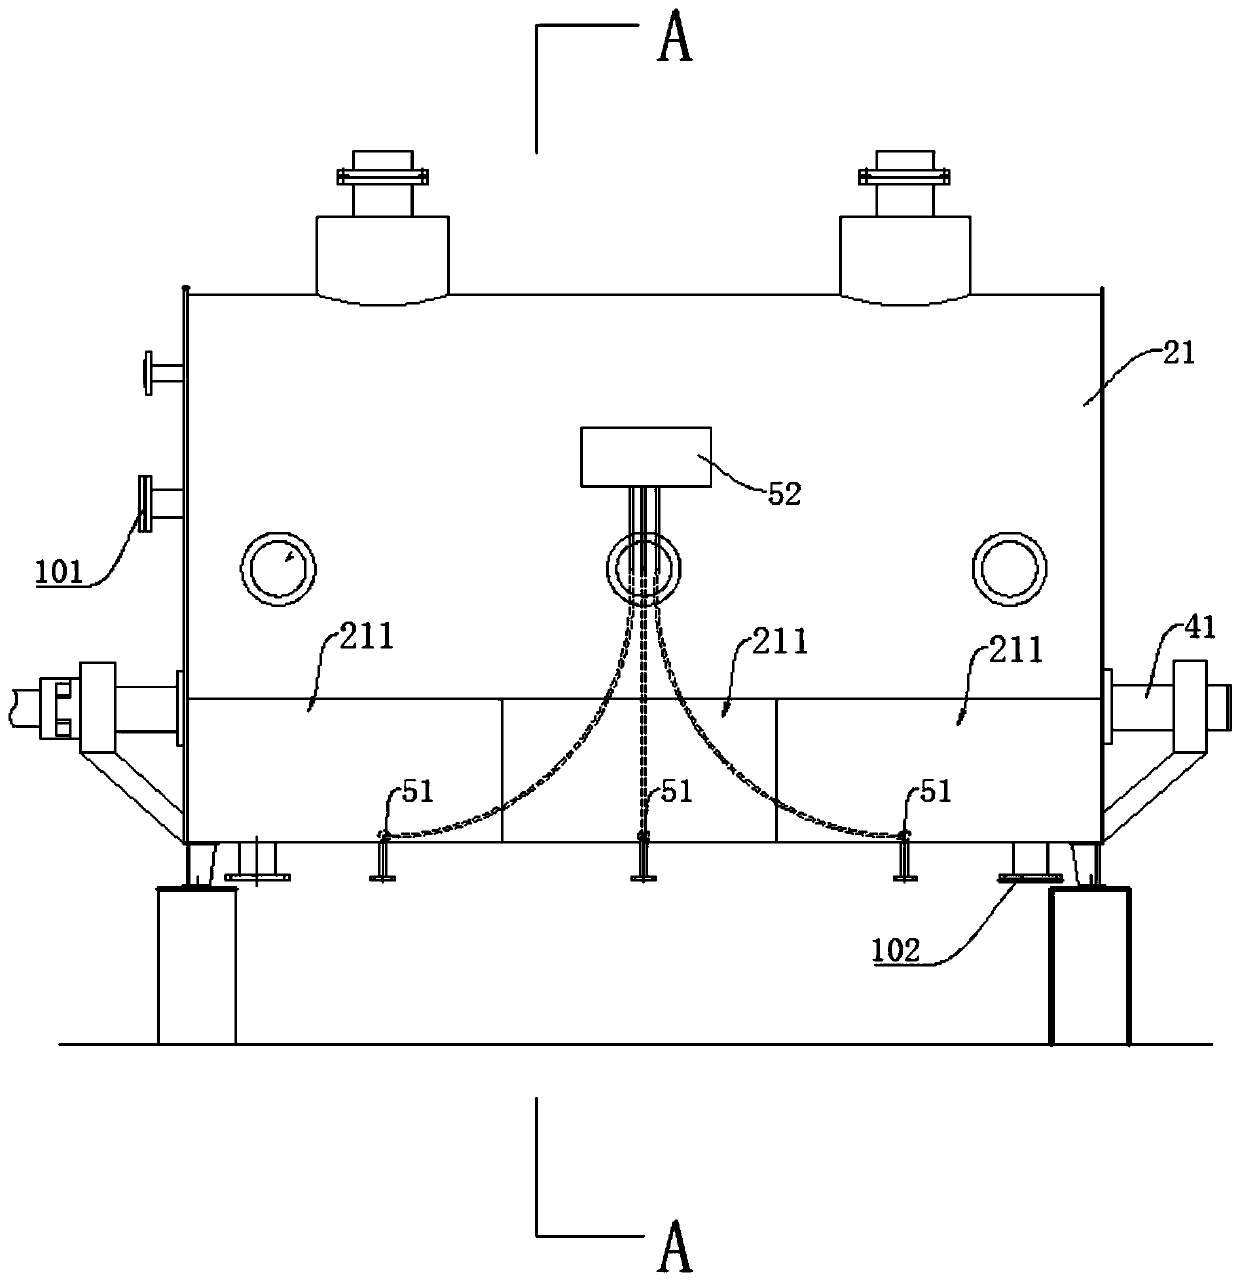 Draining system for brown-sugar continuous boiling tank